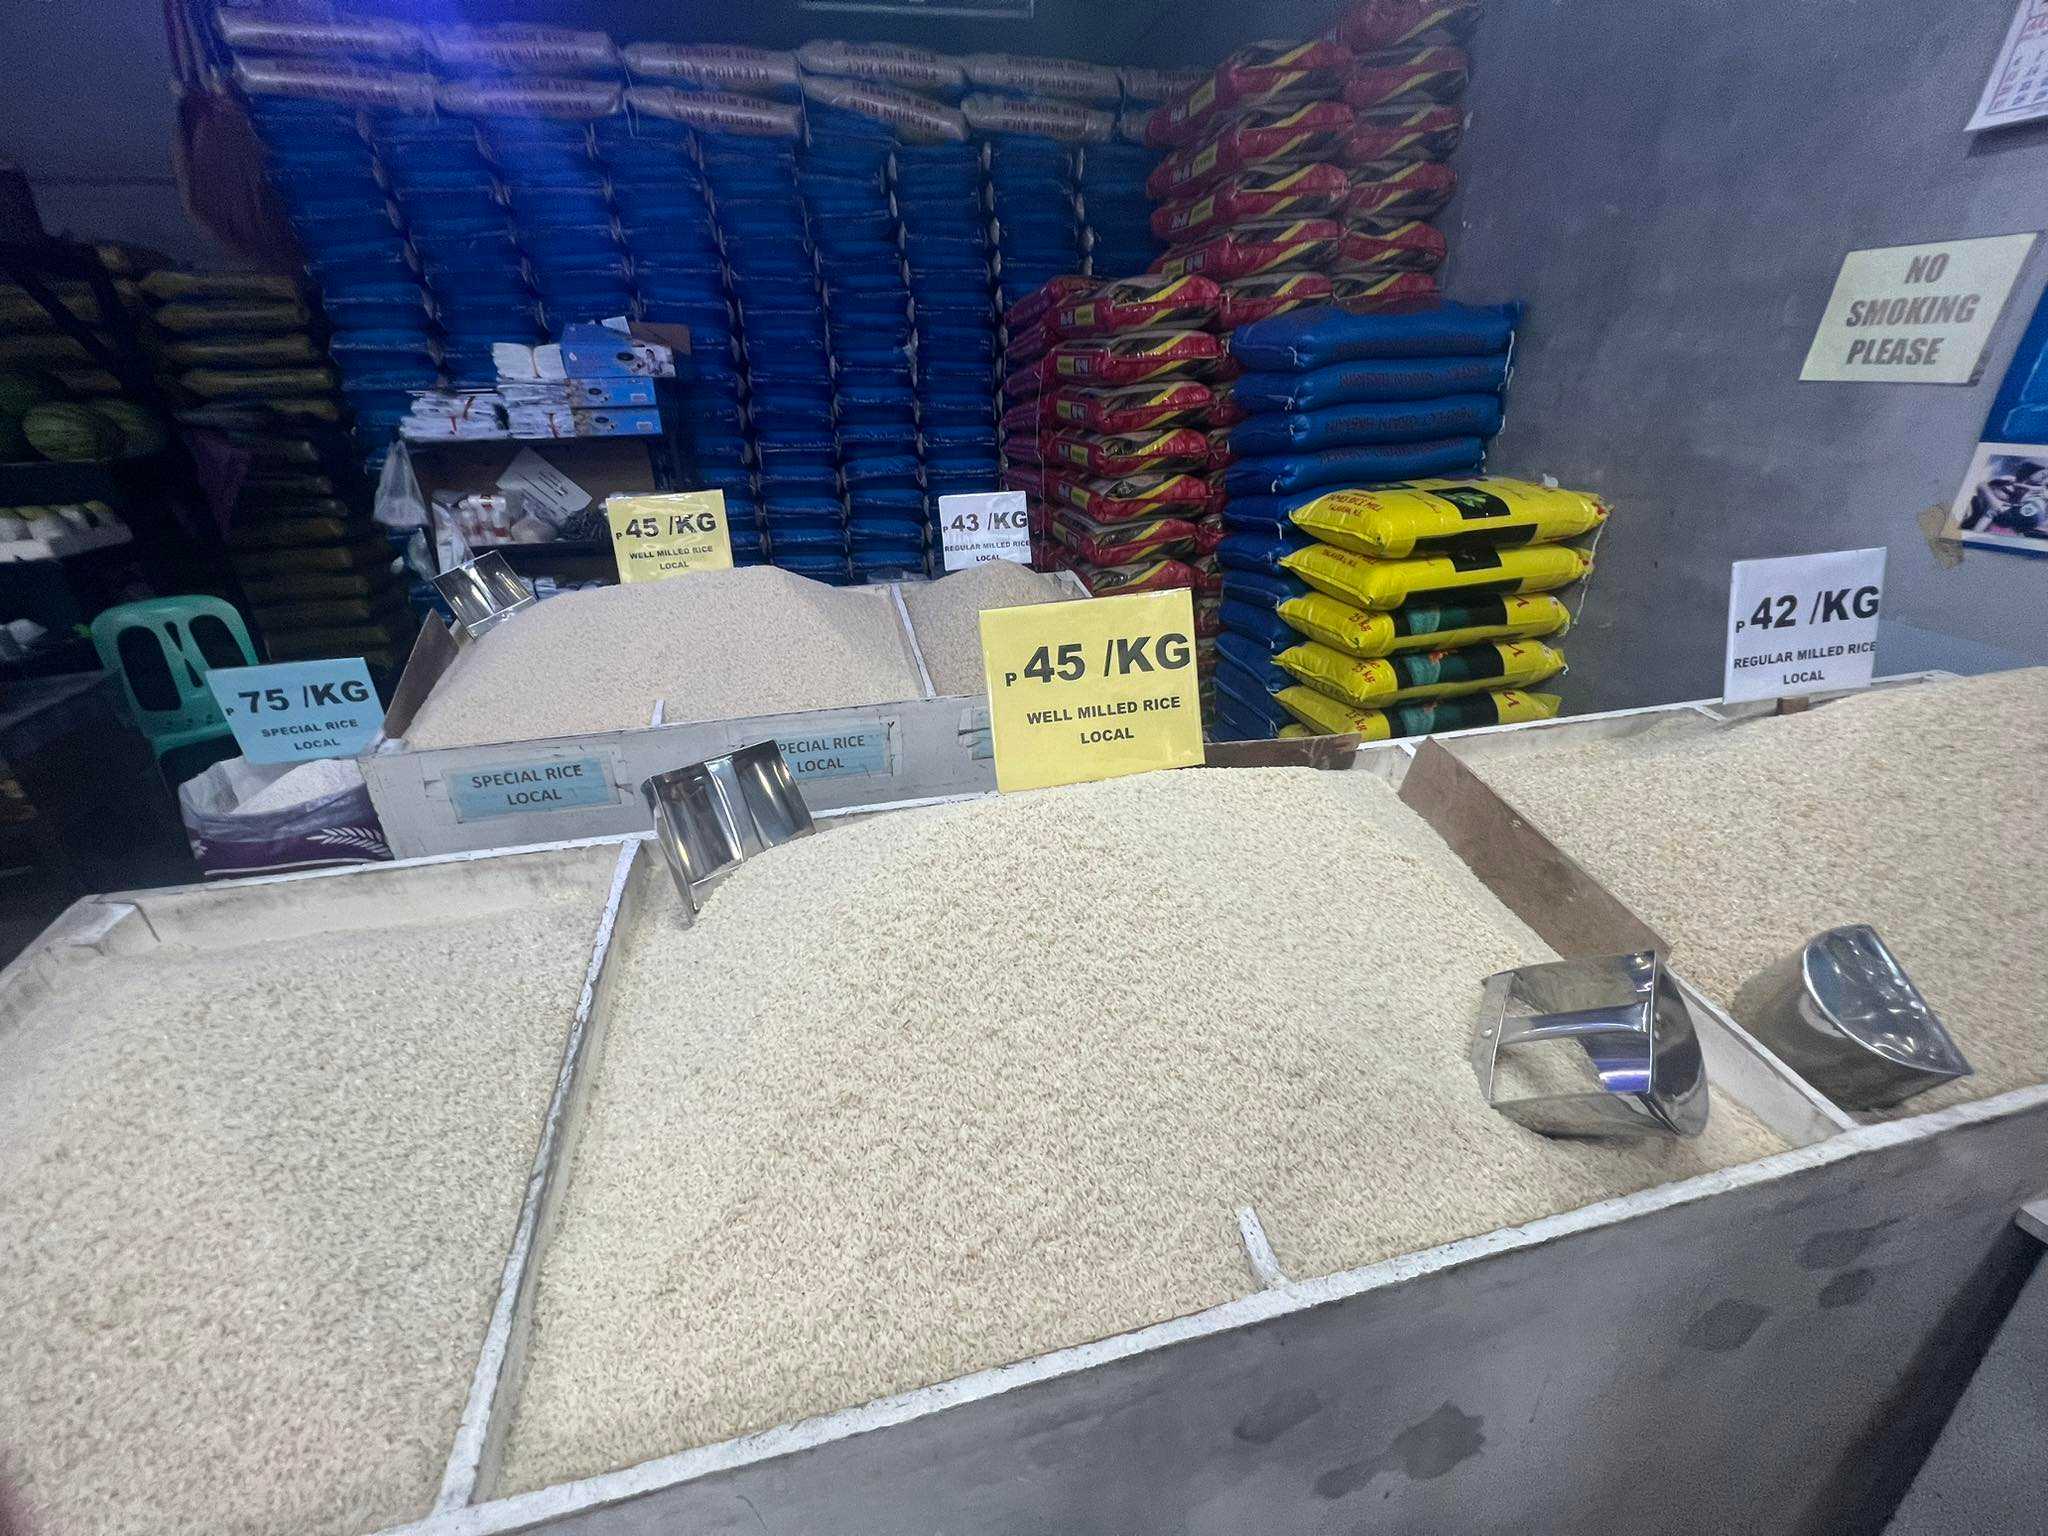 Local rice costly than imported at Trabaho Market, says rice retailer